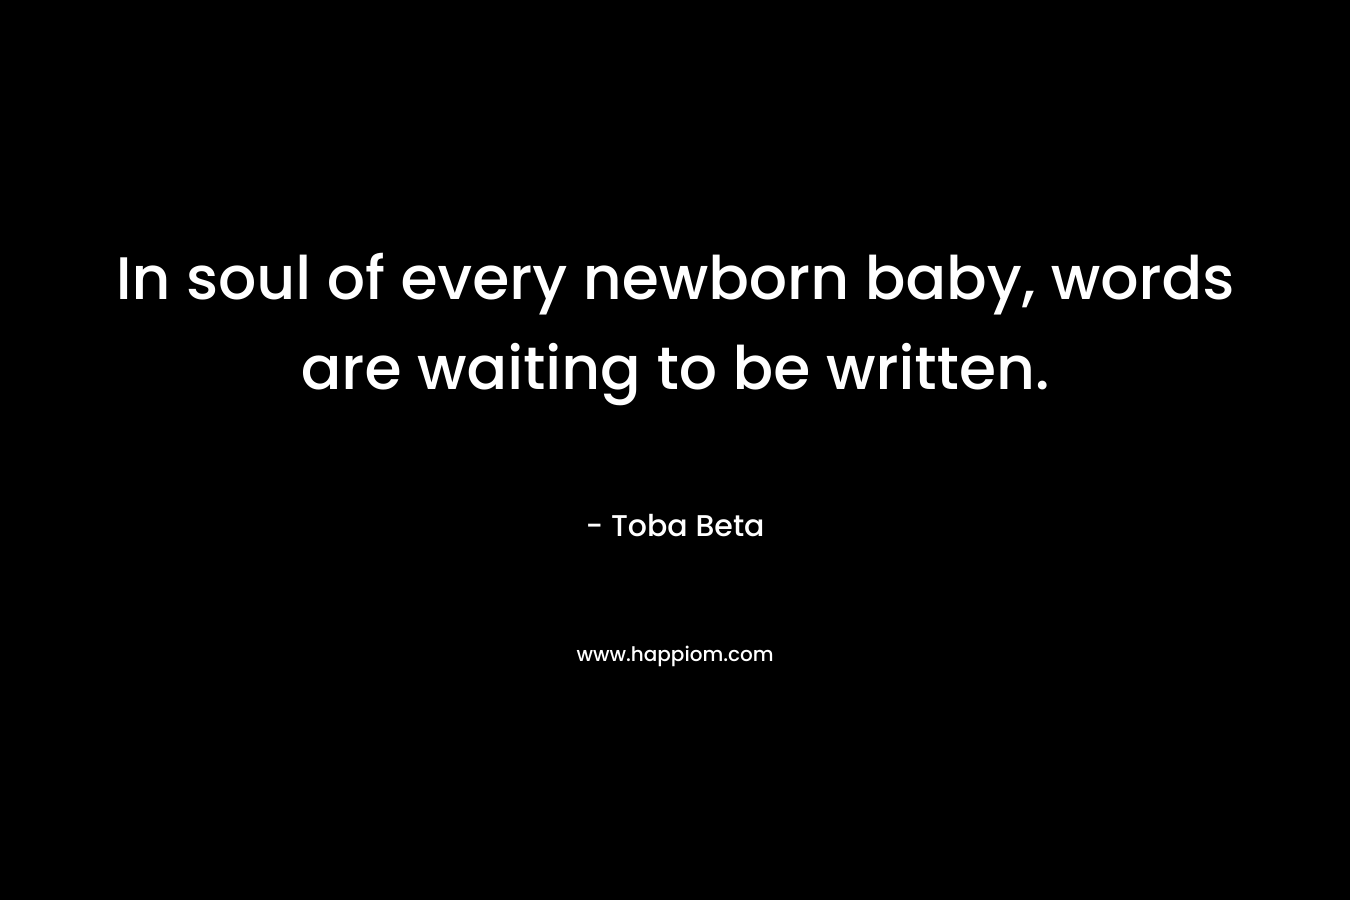 In soul of every newborn baby, words are waiting to be written. – Toba Beta